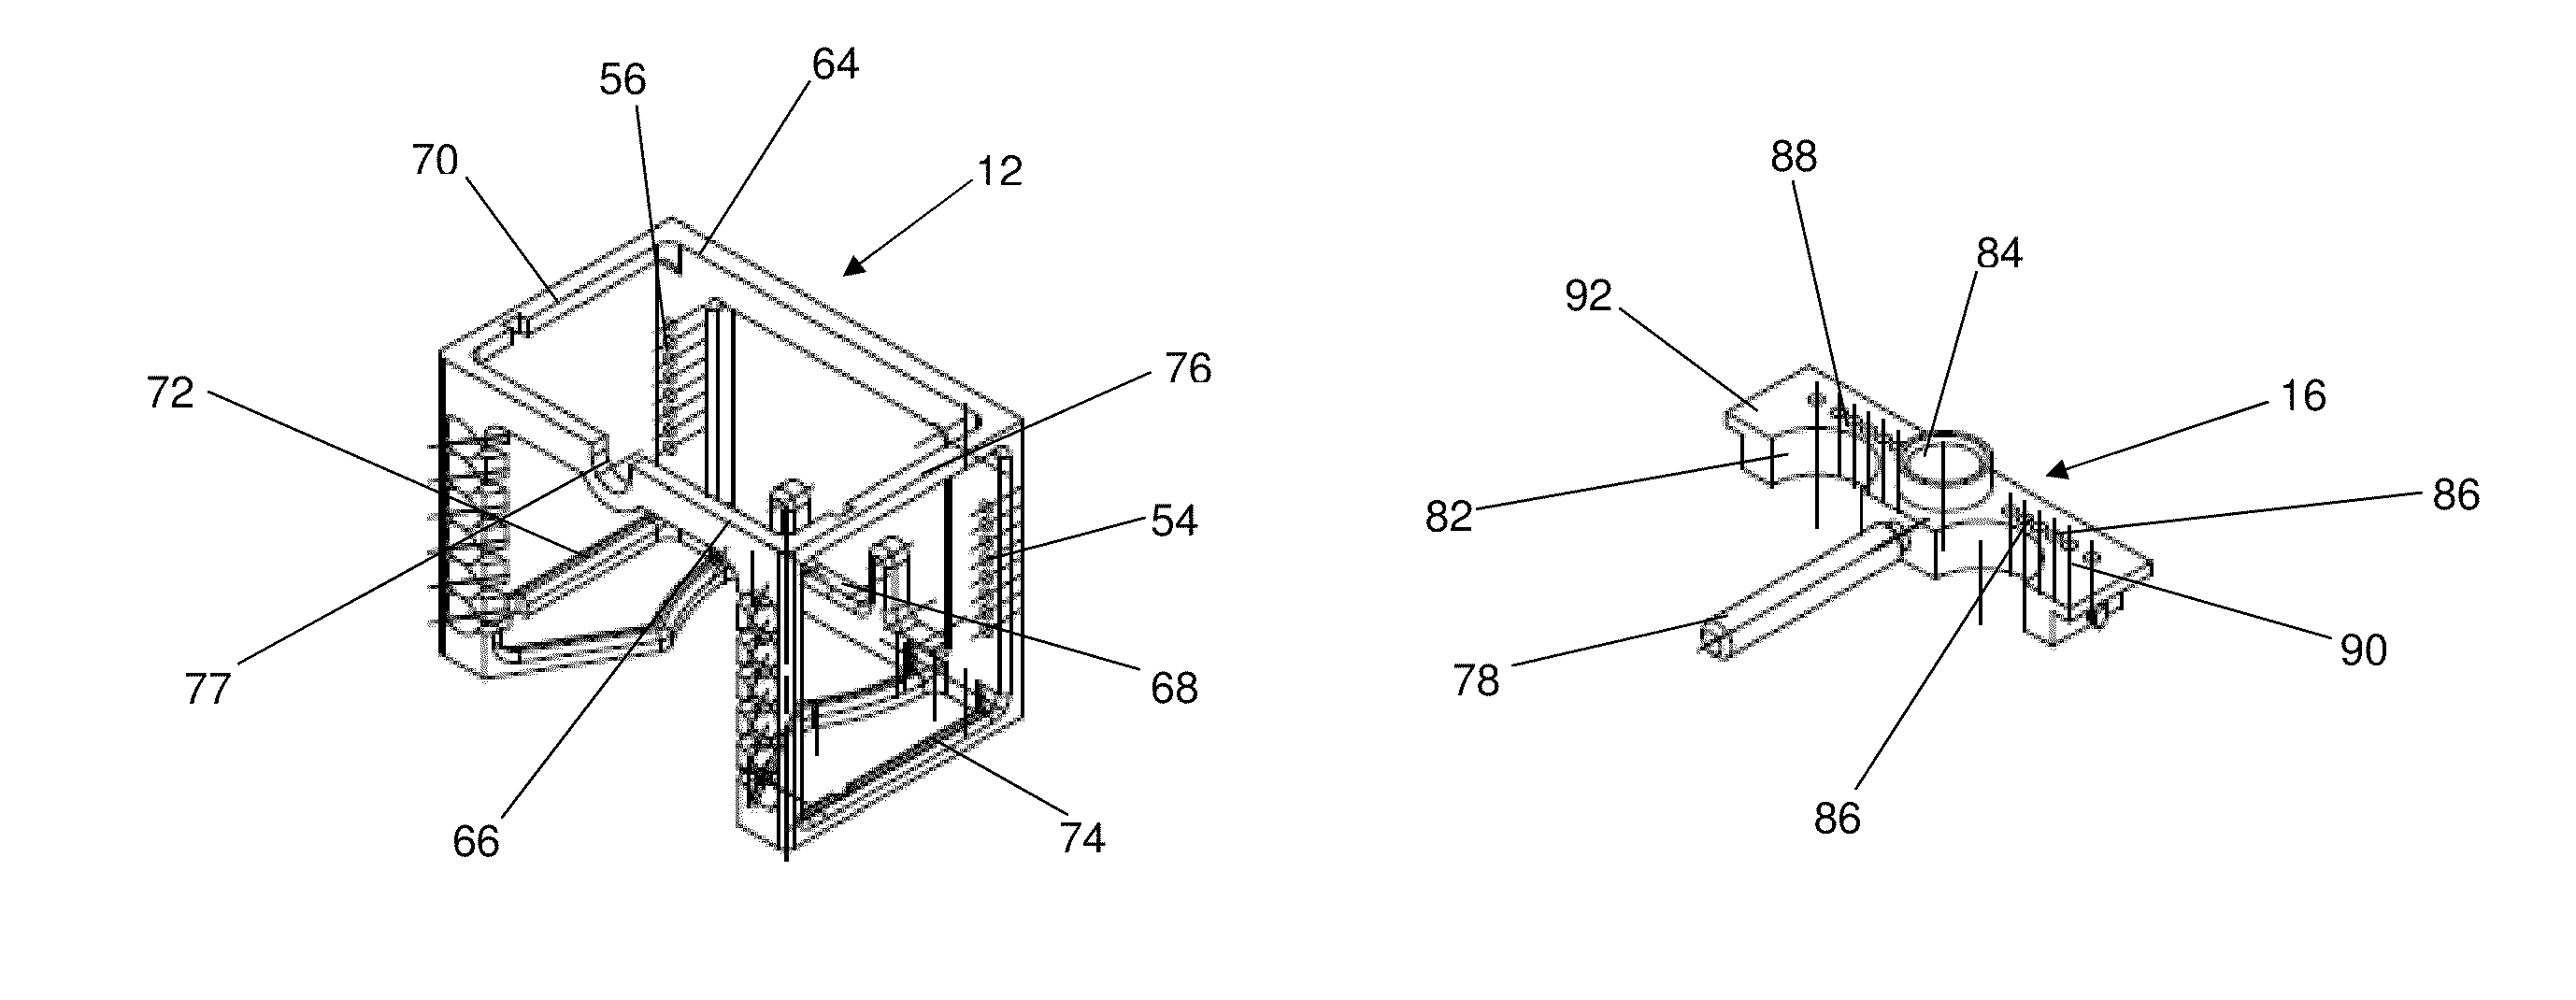 Instruments for carrying out an operating procedure on a joint